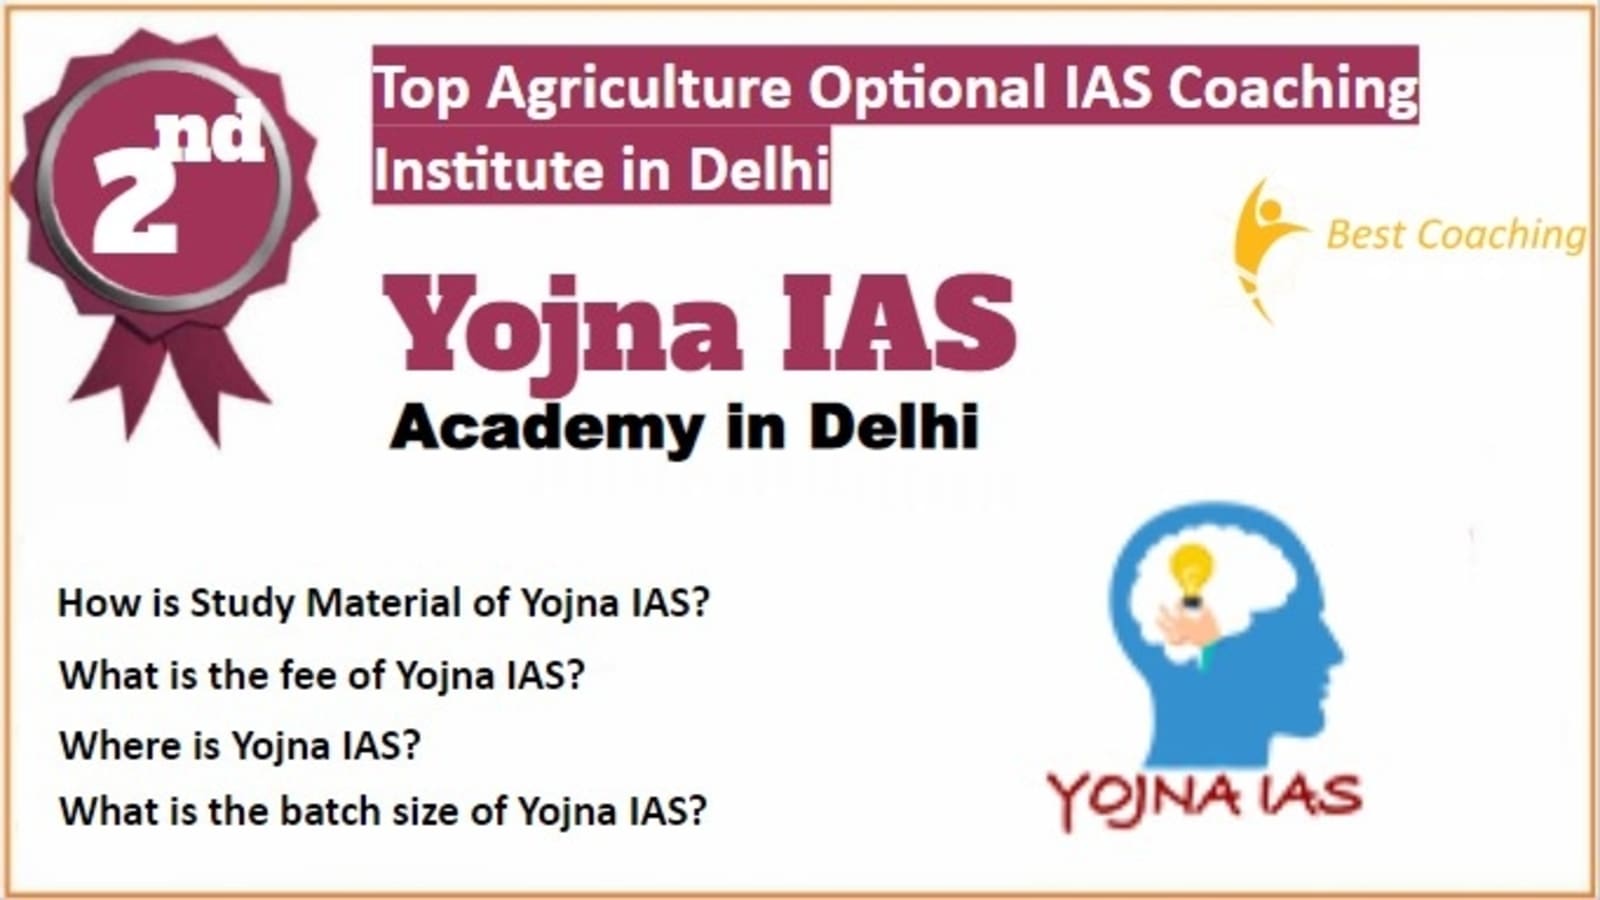 Rank 2 Best Agriculture Optional IAS Coaching in Delhi